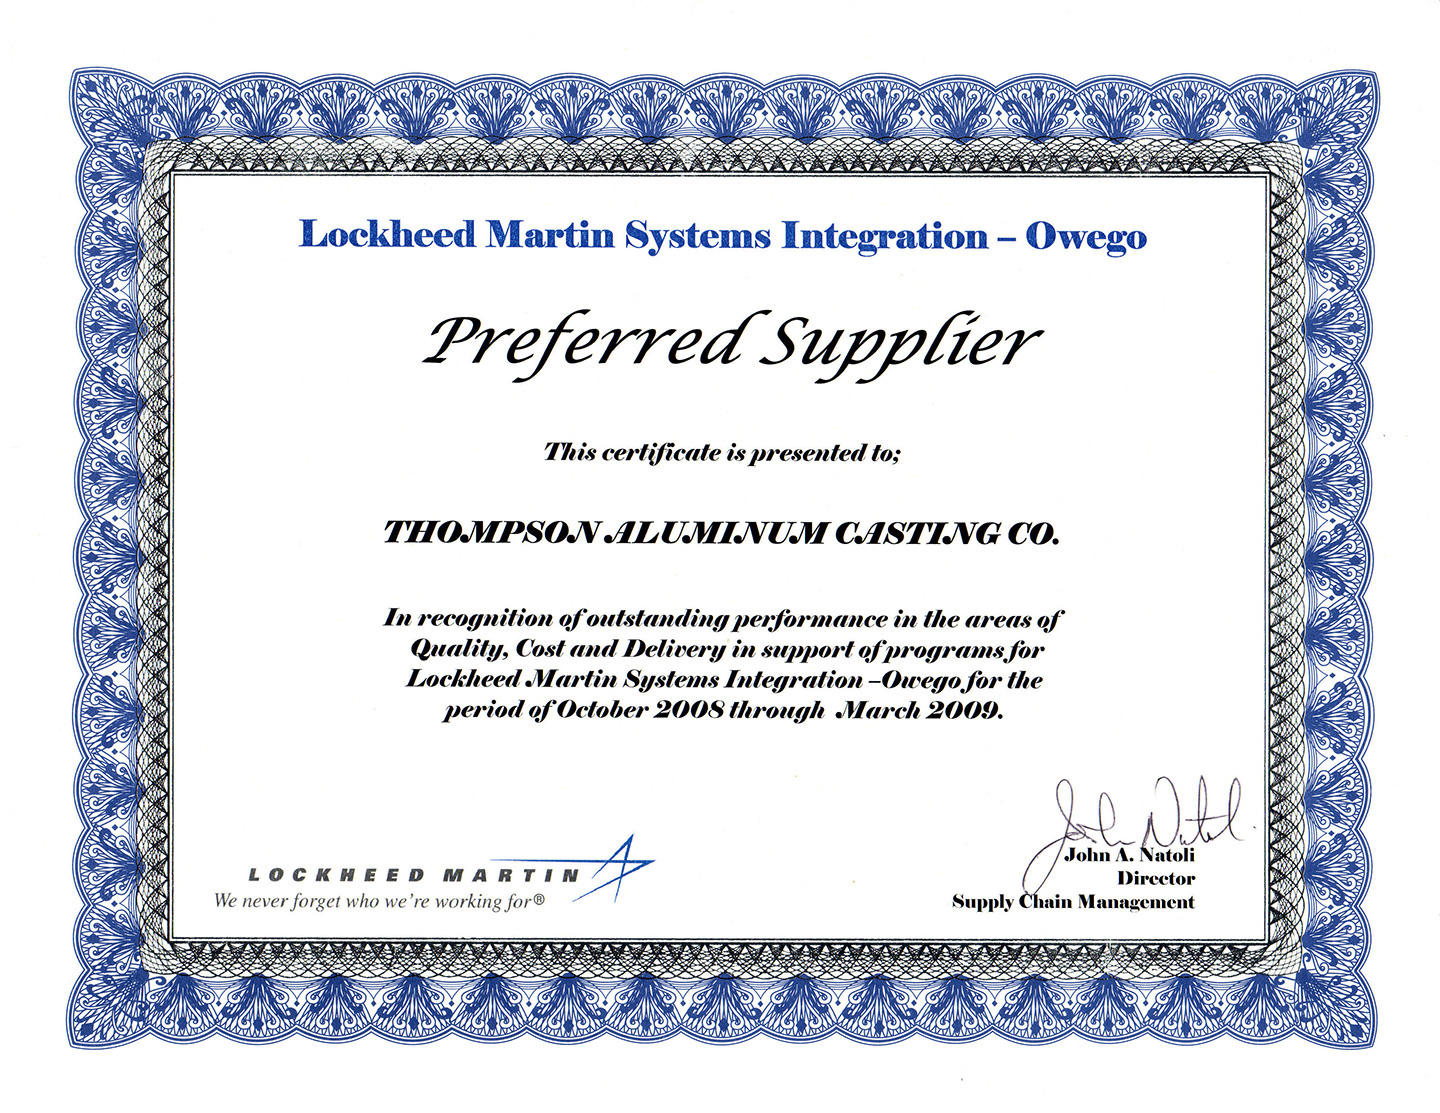 Image of Lockheed Martin preferred supplier certificate presented to Thompson Aluminum Casting